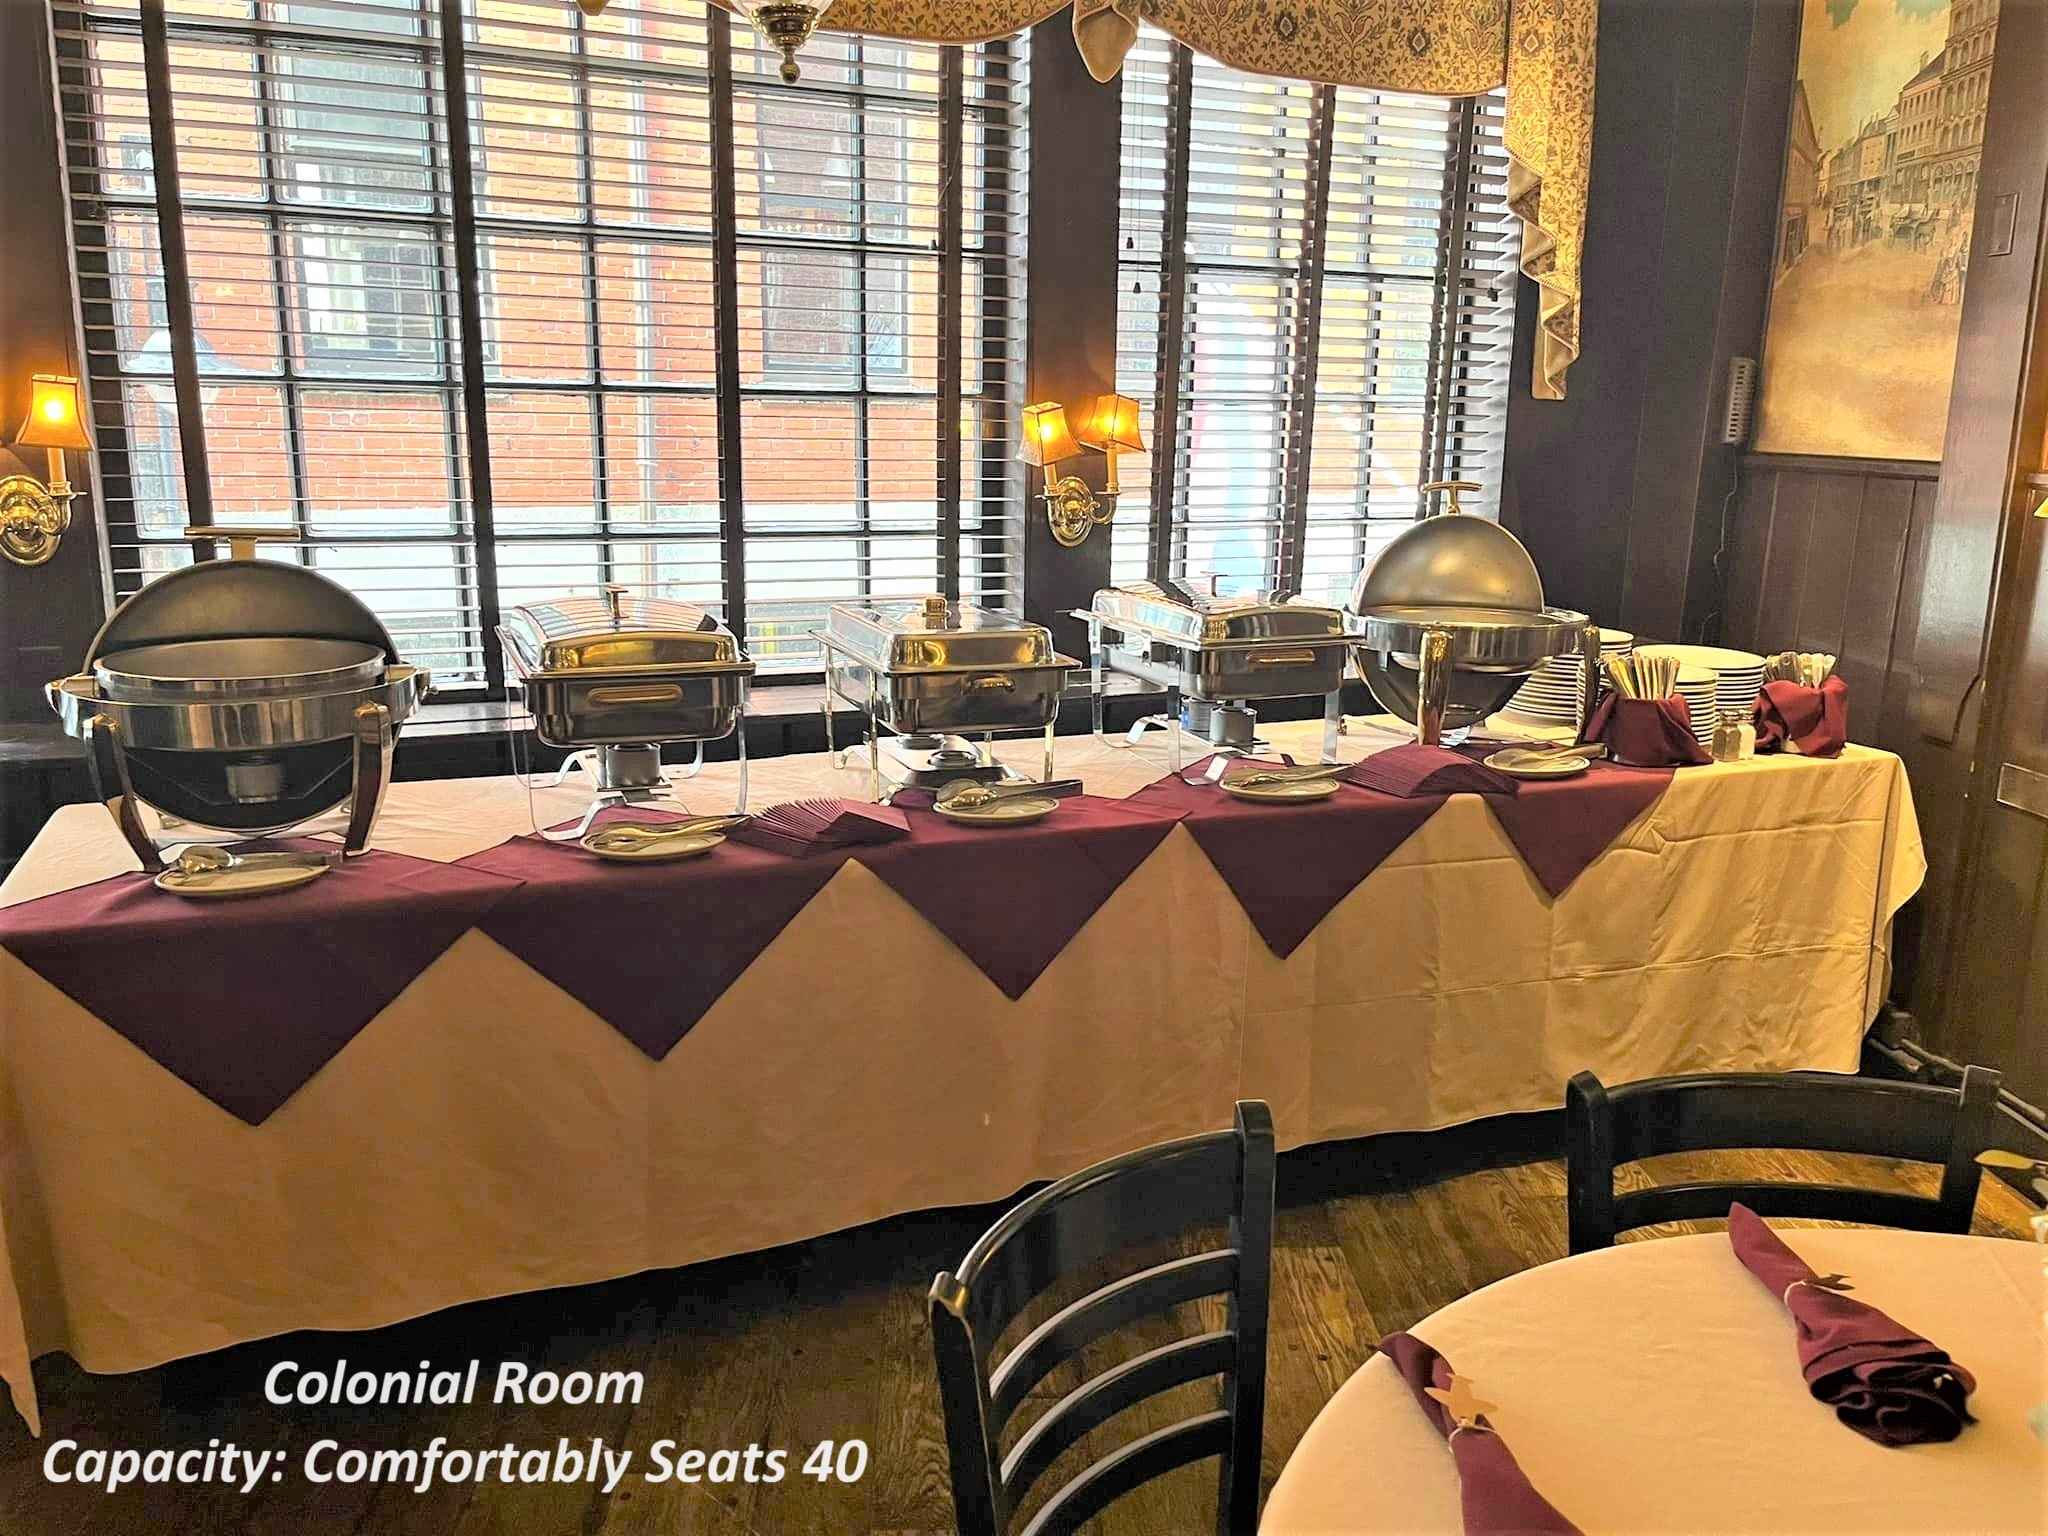 Colonial Room